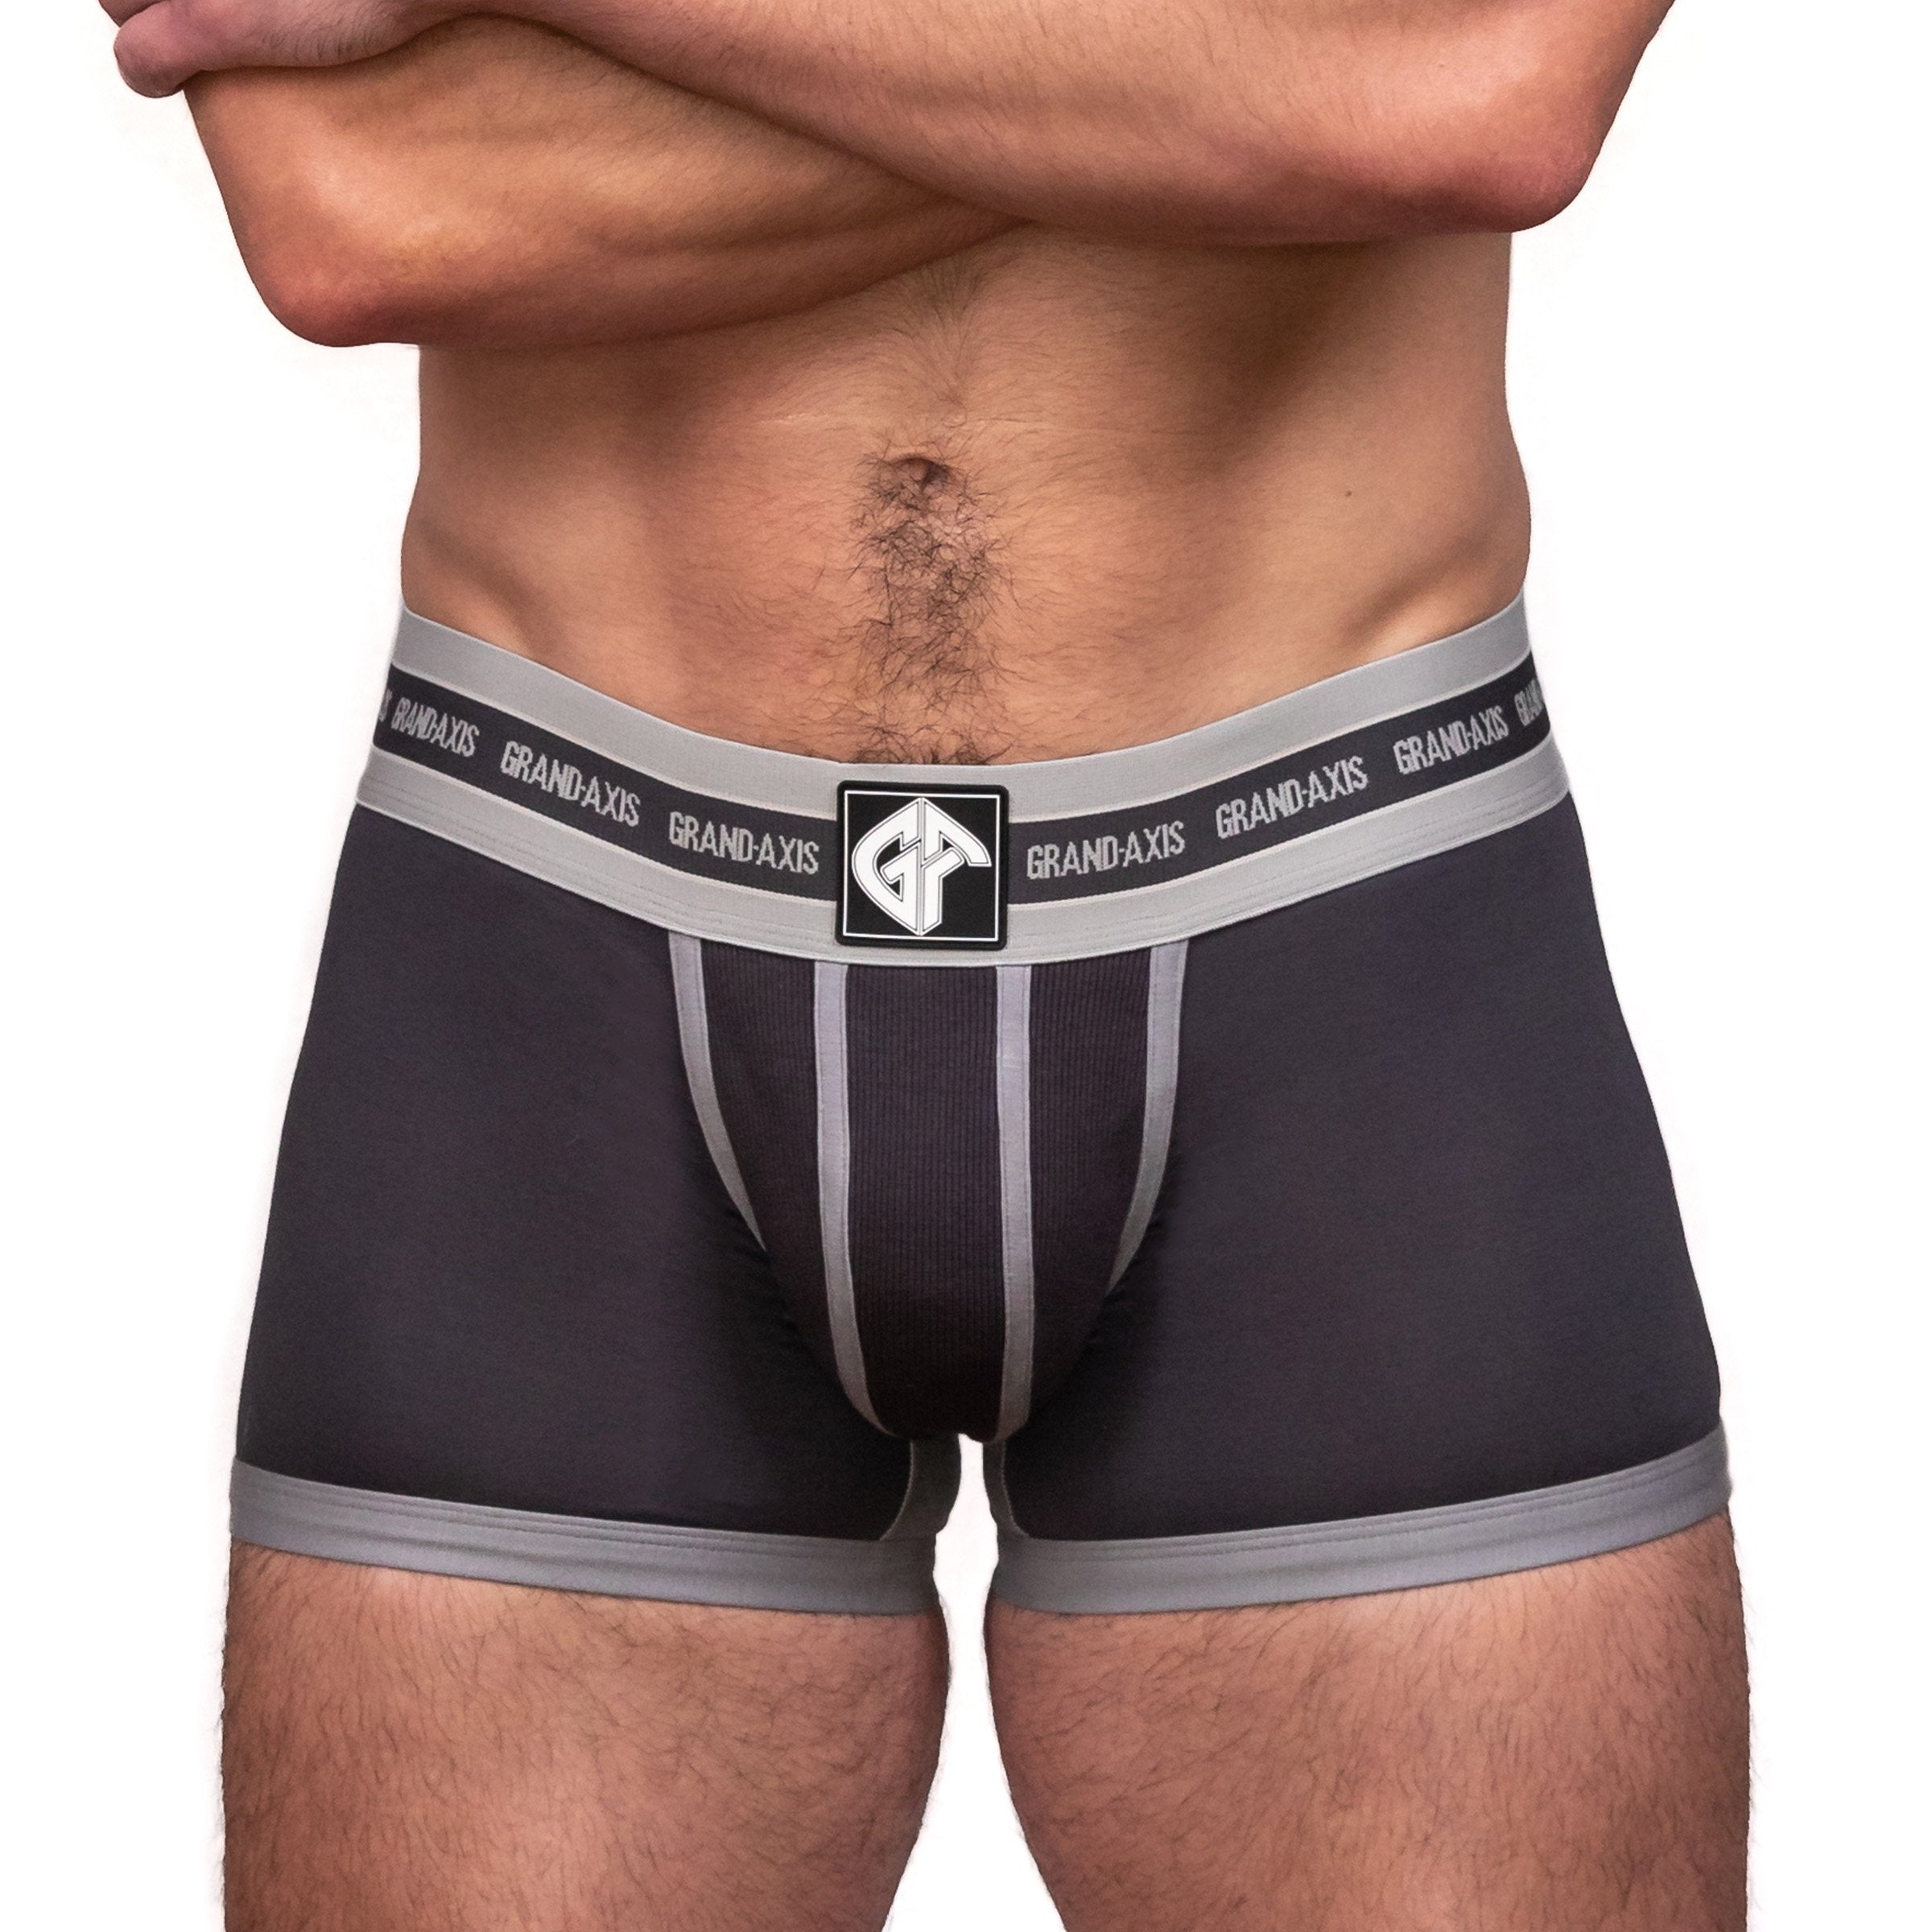 Men's Underwear Review: GAME CHANGING PRODUCT? 